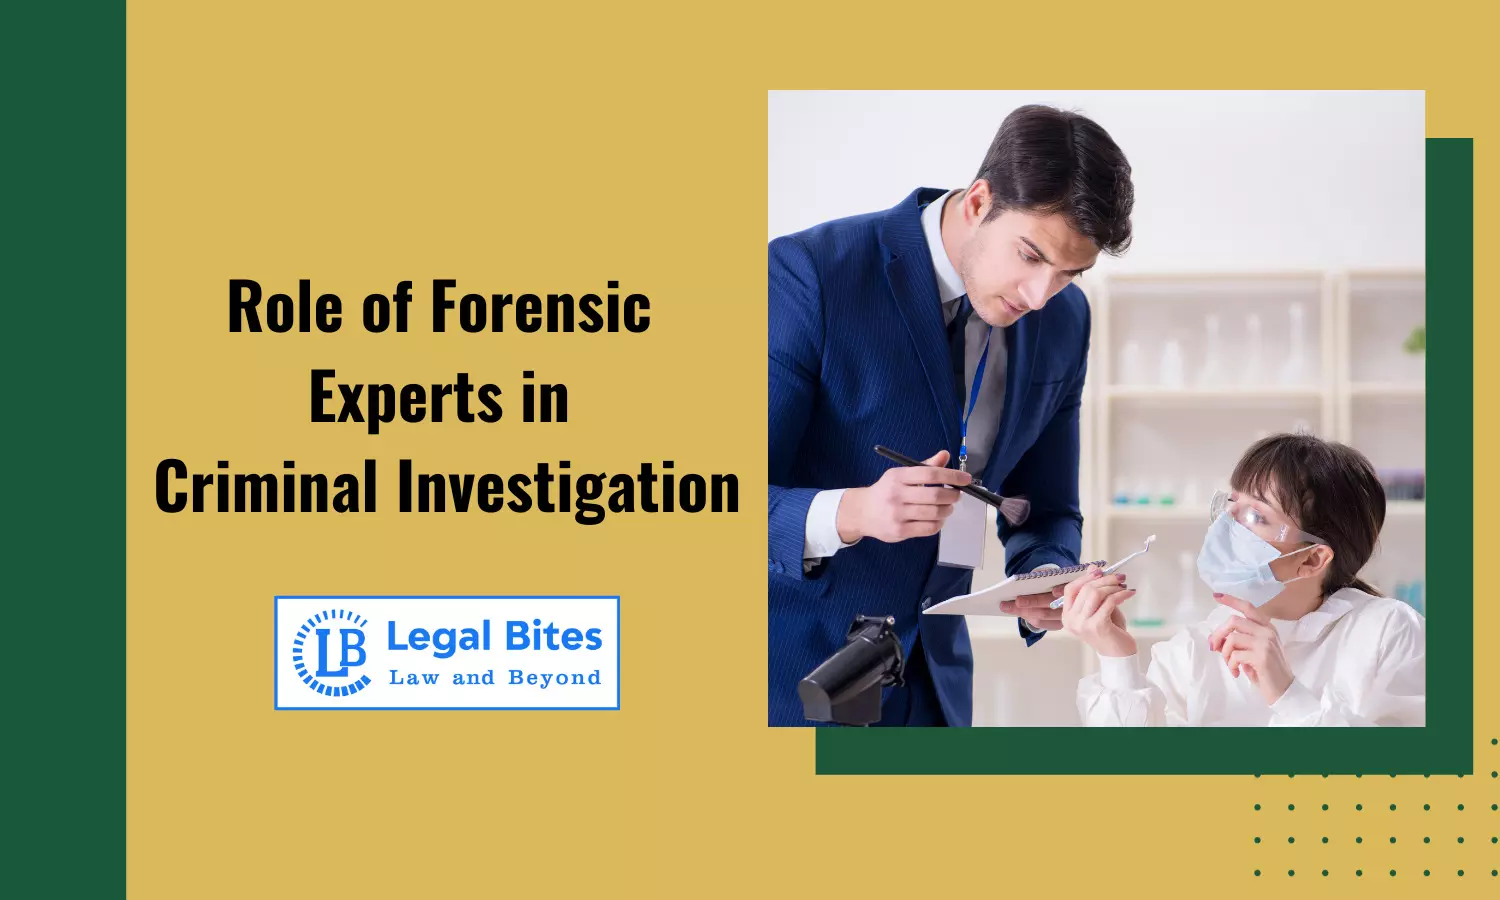 Role of Forensic Experts in Criminal Investigation